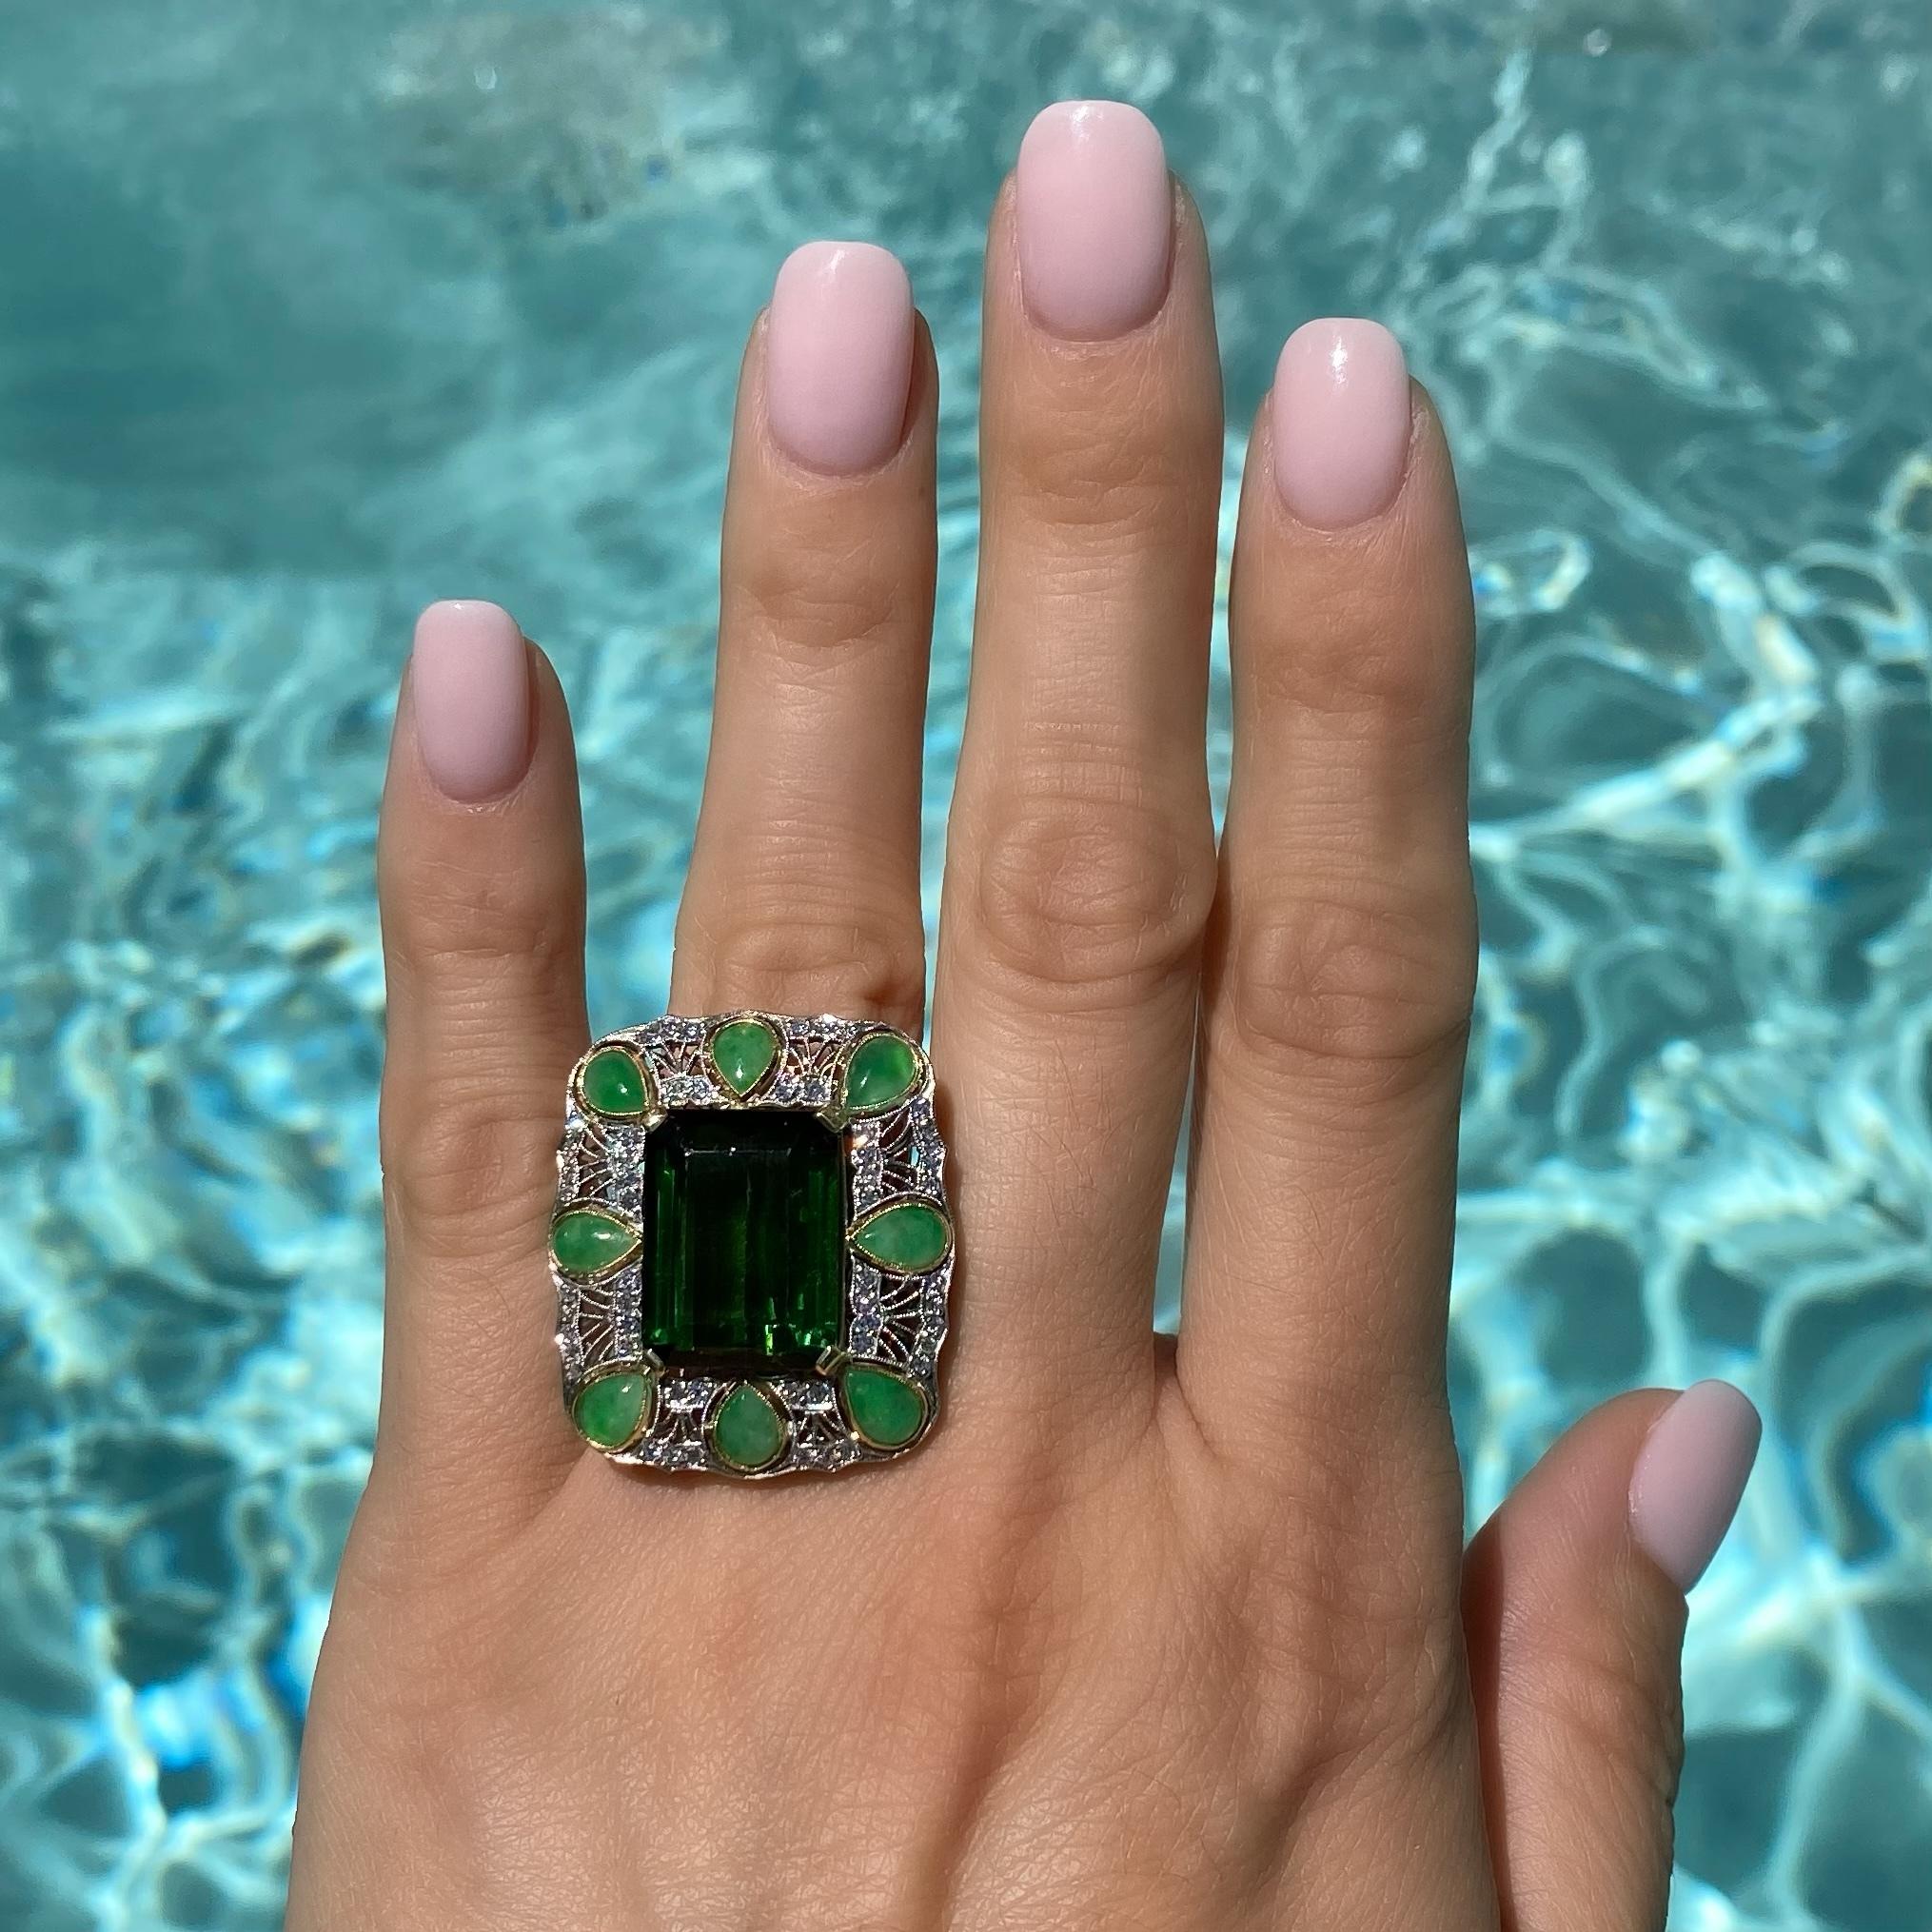 Simply Beautiful and finely detailed Cocktail Ring, center securely set with a 14.50 Carat Green Tourmaline surrounded by Diamonds, approx. 0.84tcw and enhanced with 8 pear shape Jadeite stones set in 18K Yellow Gold Bezel settings. Hand crafted